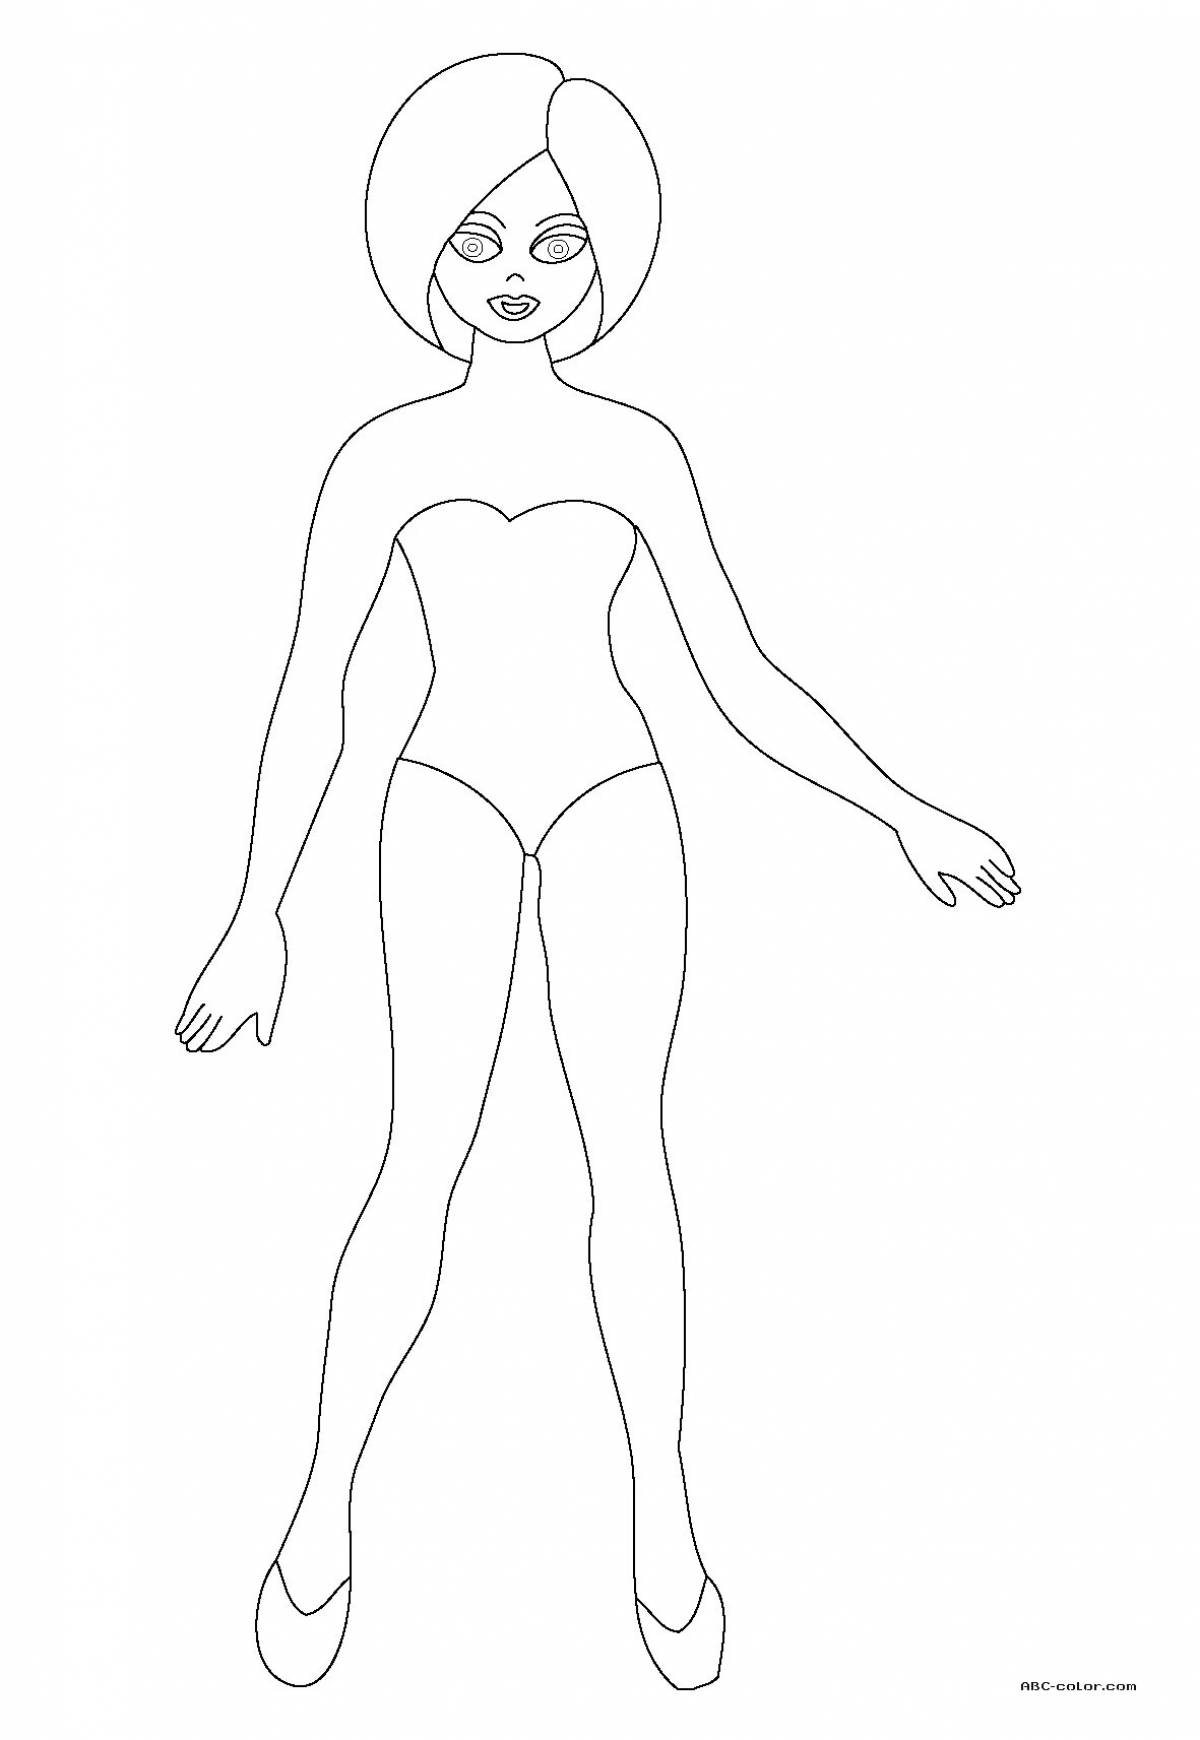 Coloring page magic doll in a bathing suit